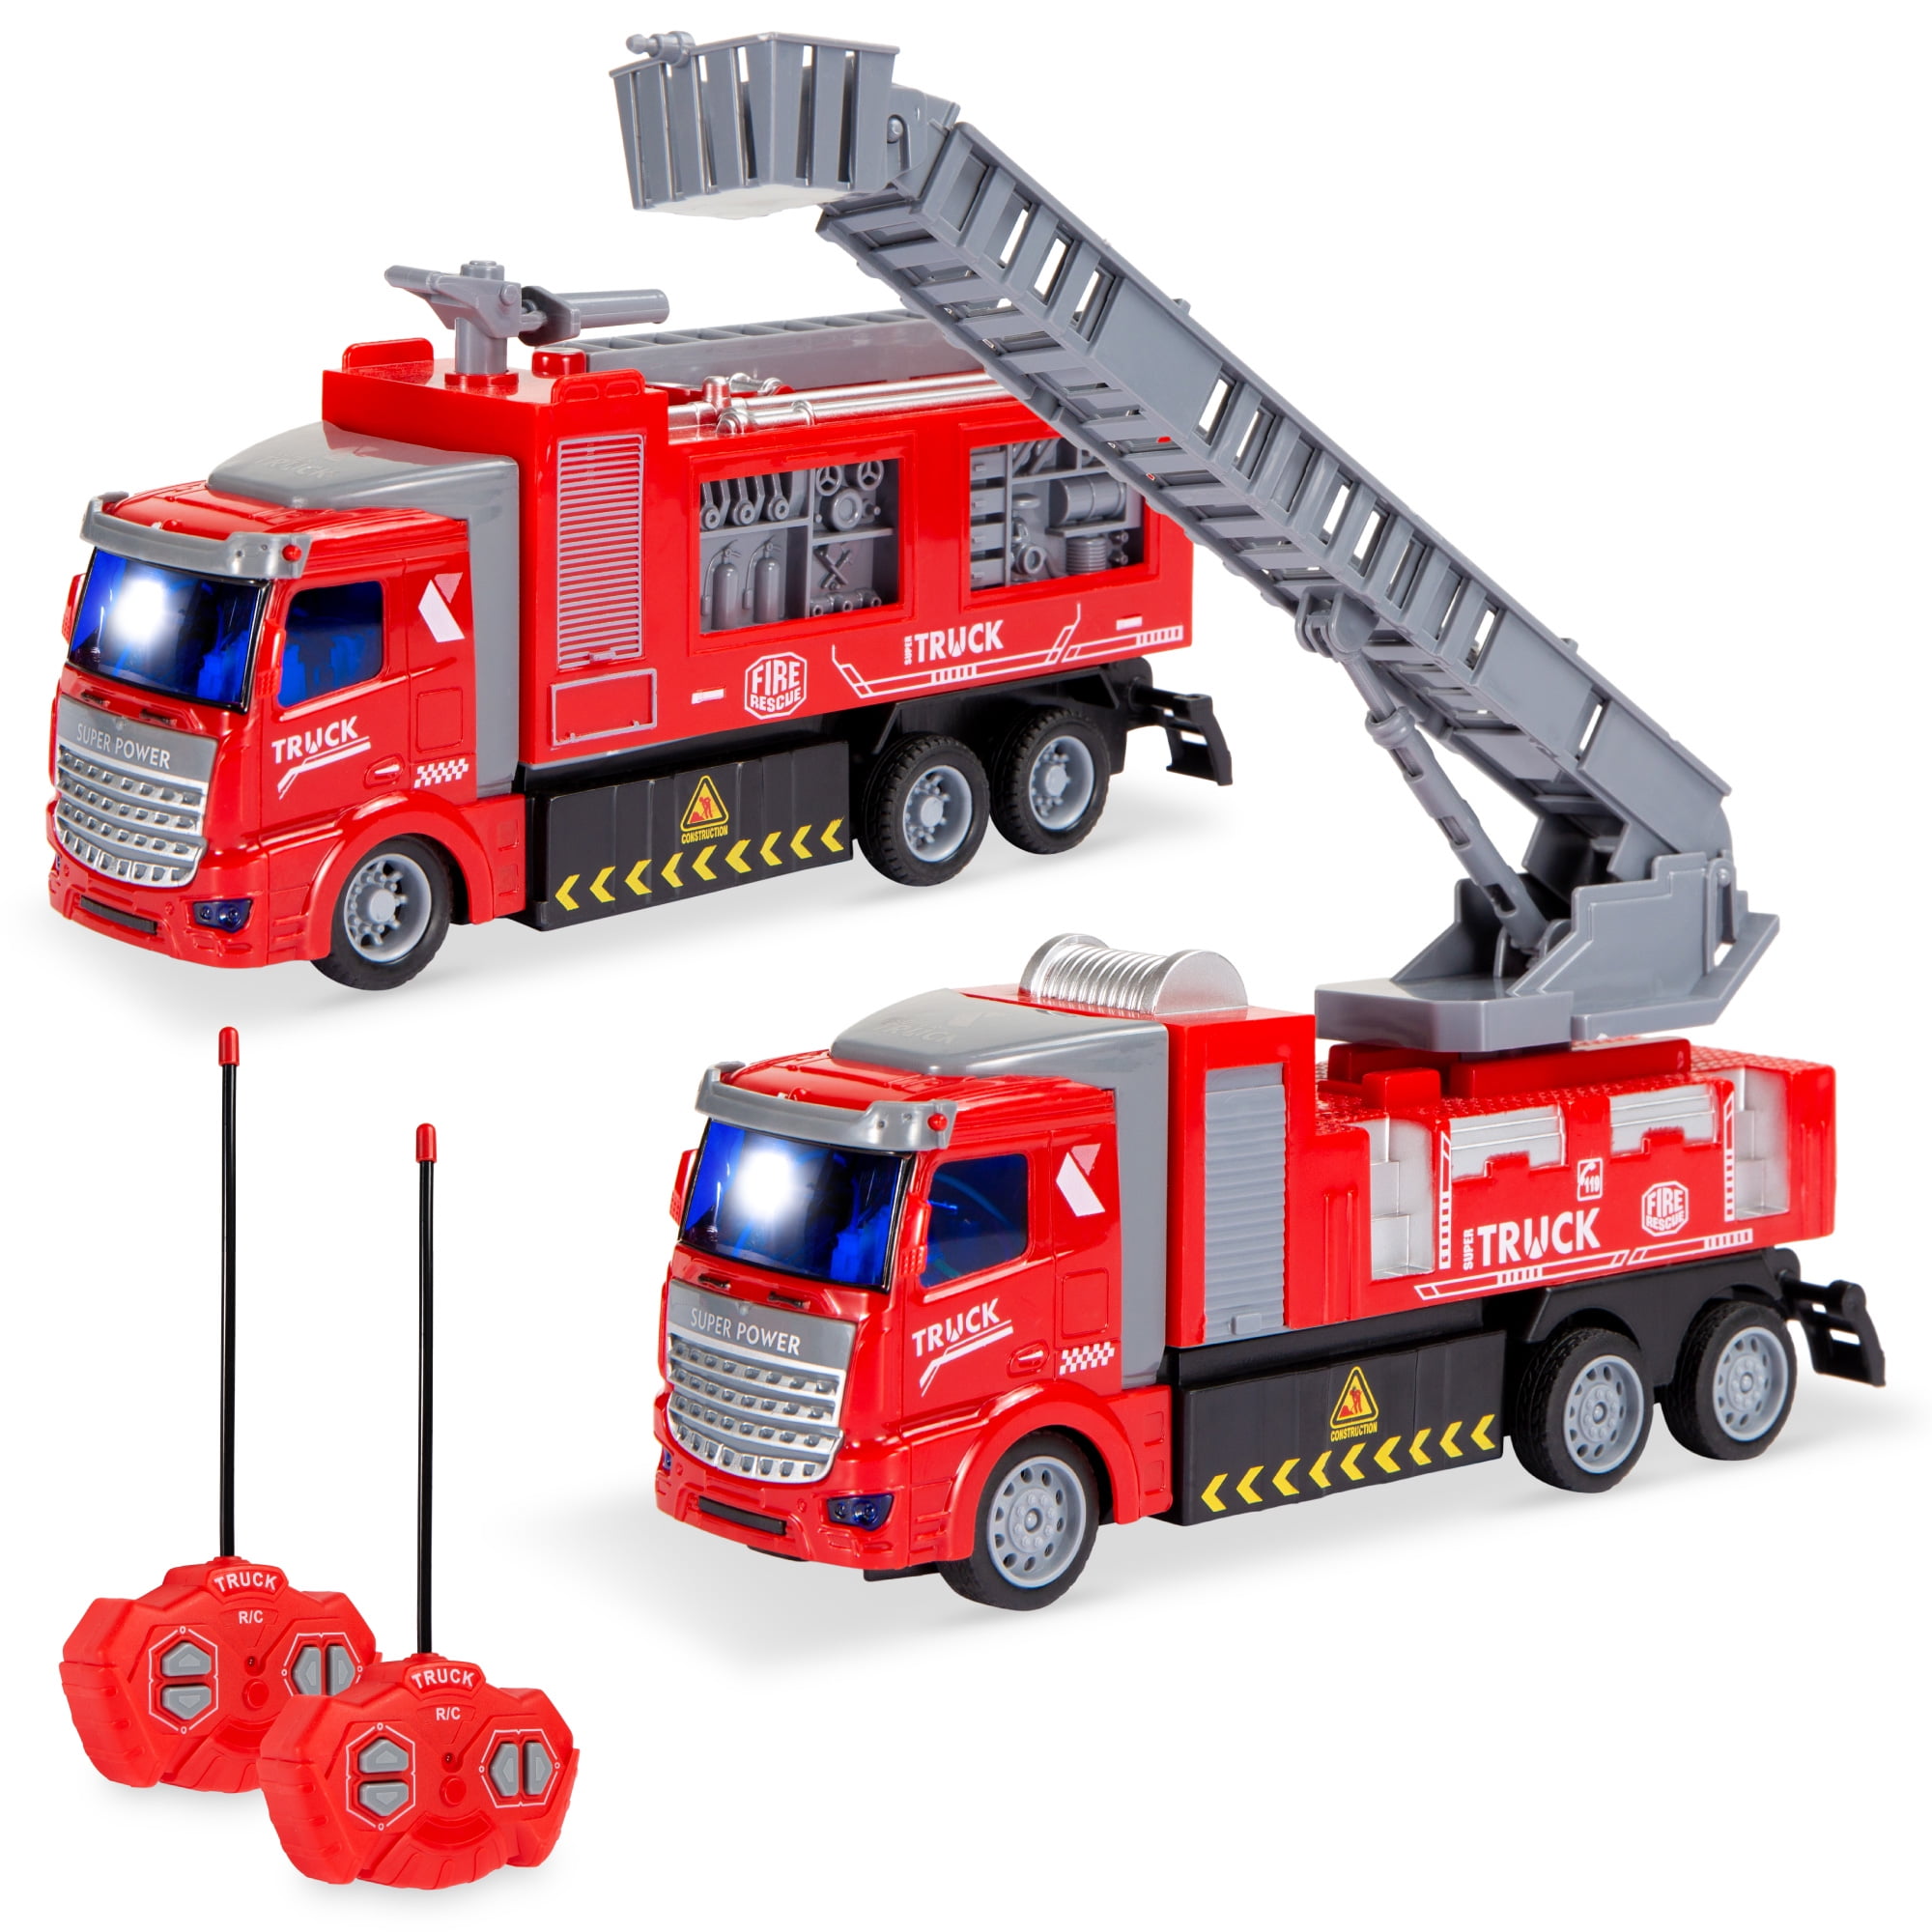 RC Fire Truck Toy Big Large Remote Control Siren Lights Ladder Red Boys Fun Gift 